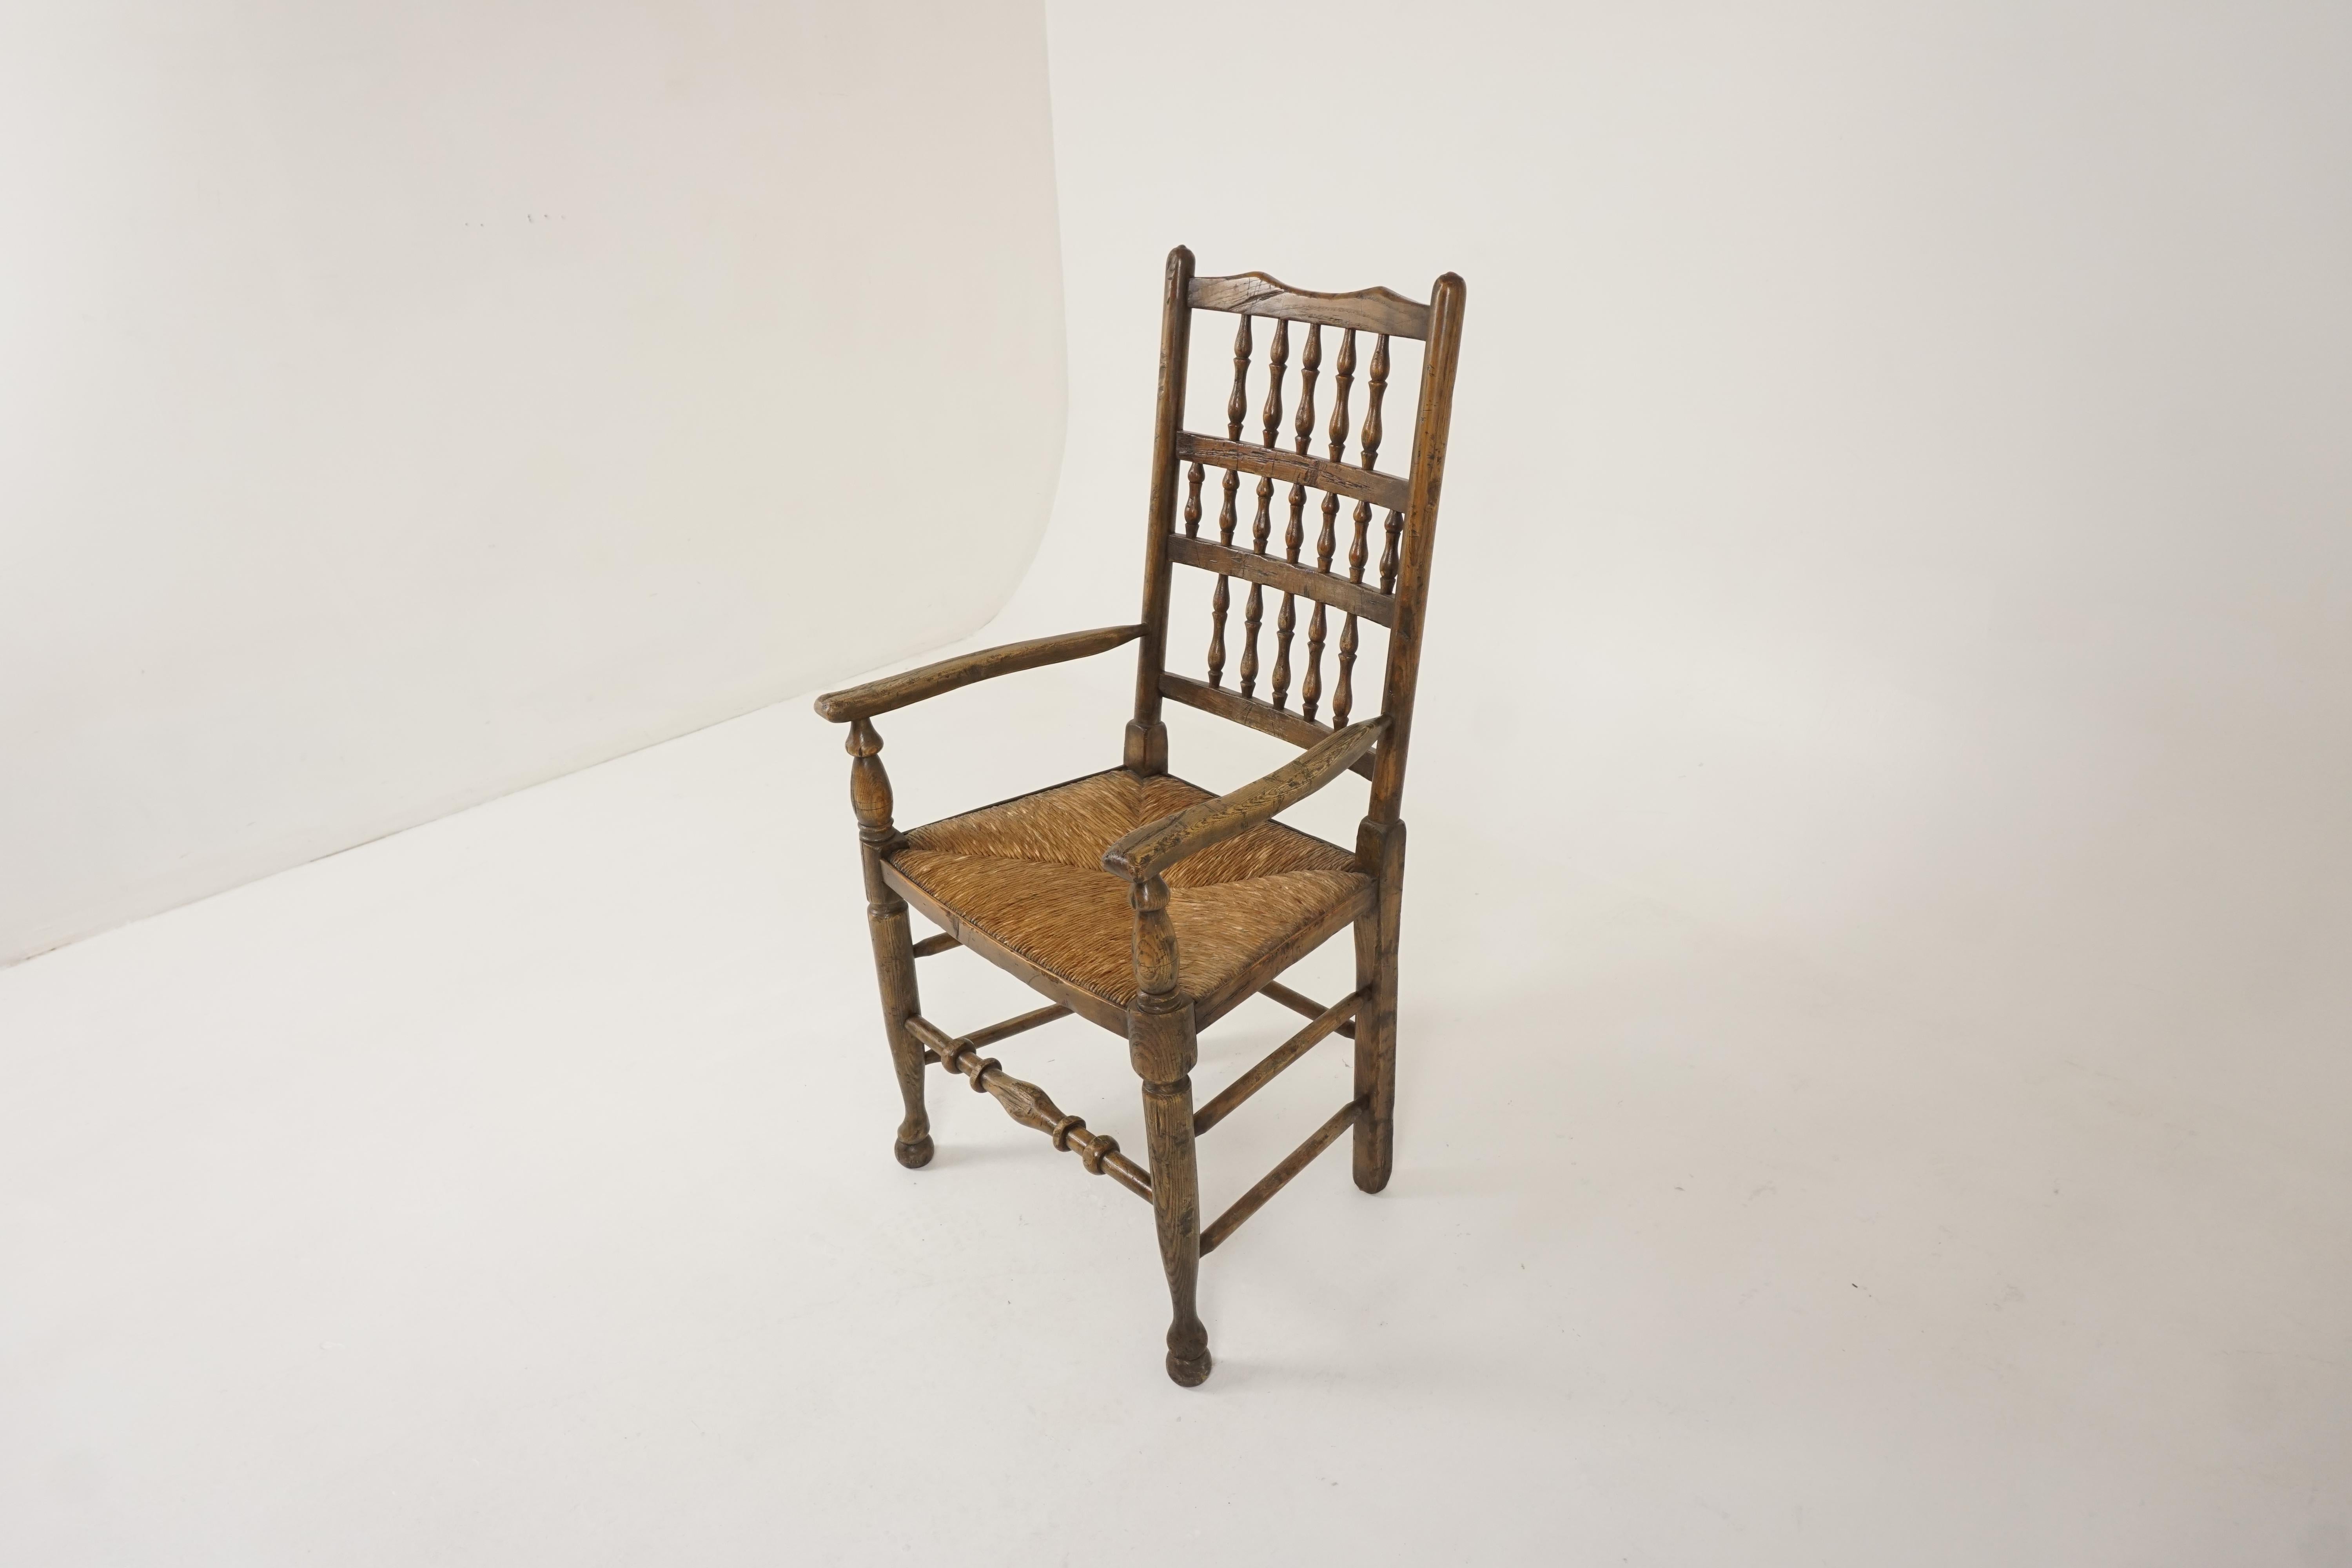 Antique Victorian Lancashire elm rush seated chair, England 1880, B2324

England 1880
Solid elm
Original finish
Lovely ladder back with 17 turned spindles
Rush seat underneath in good condition
Outswept arms
Standing on bulbous front legs